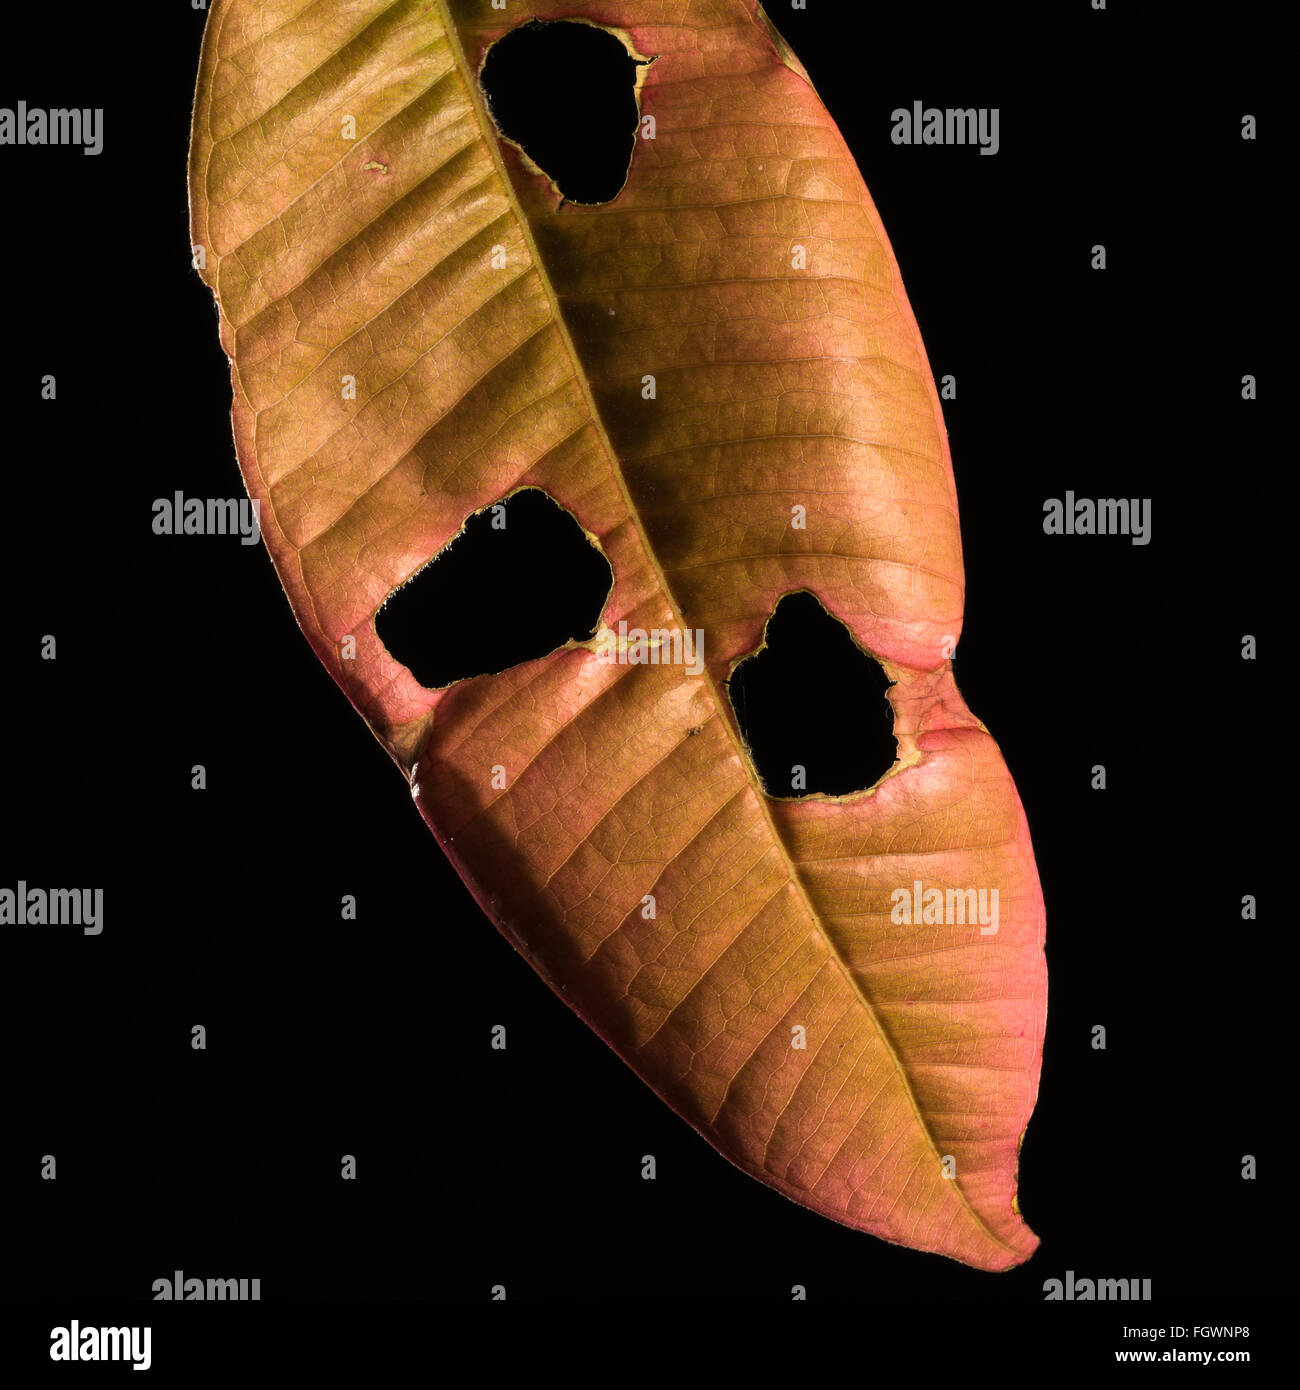 A rainforest leaf damaged by insects Stock Photo